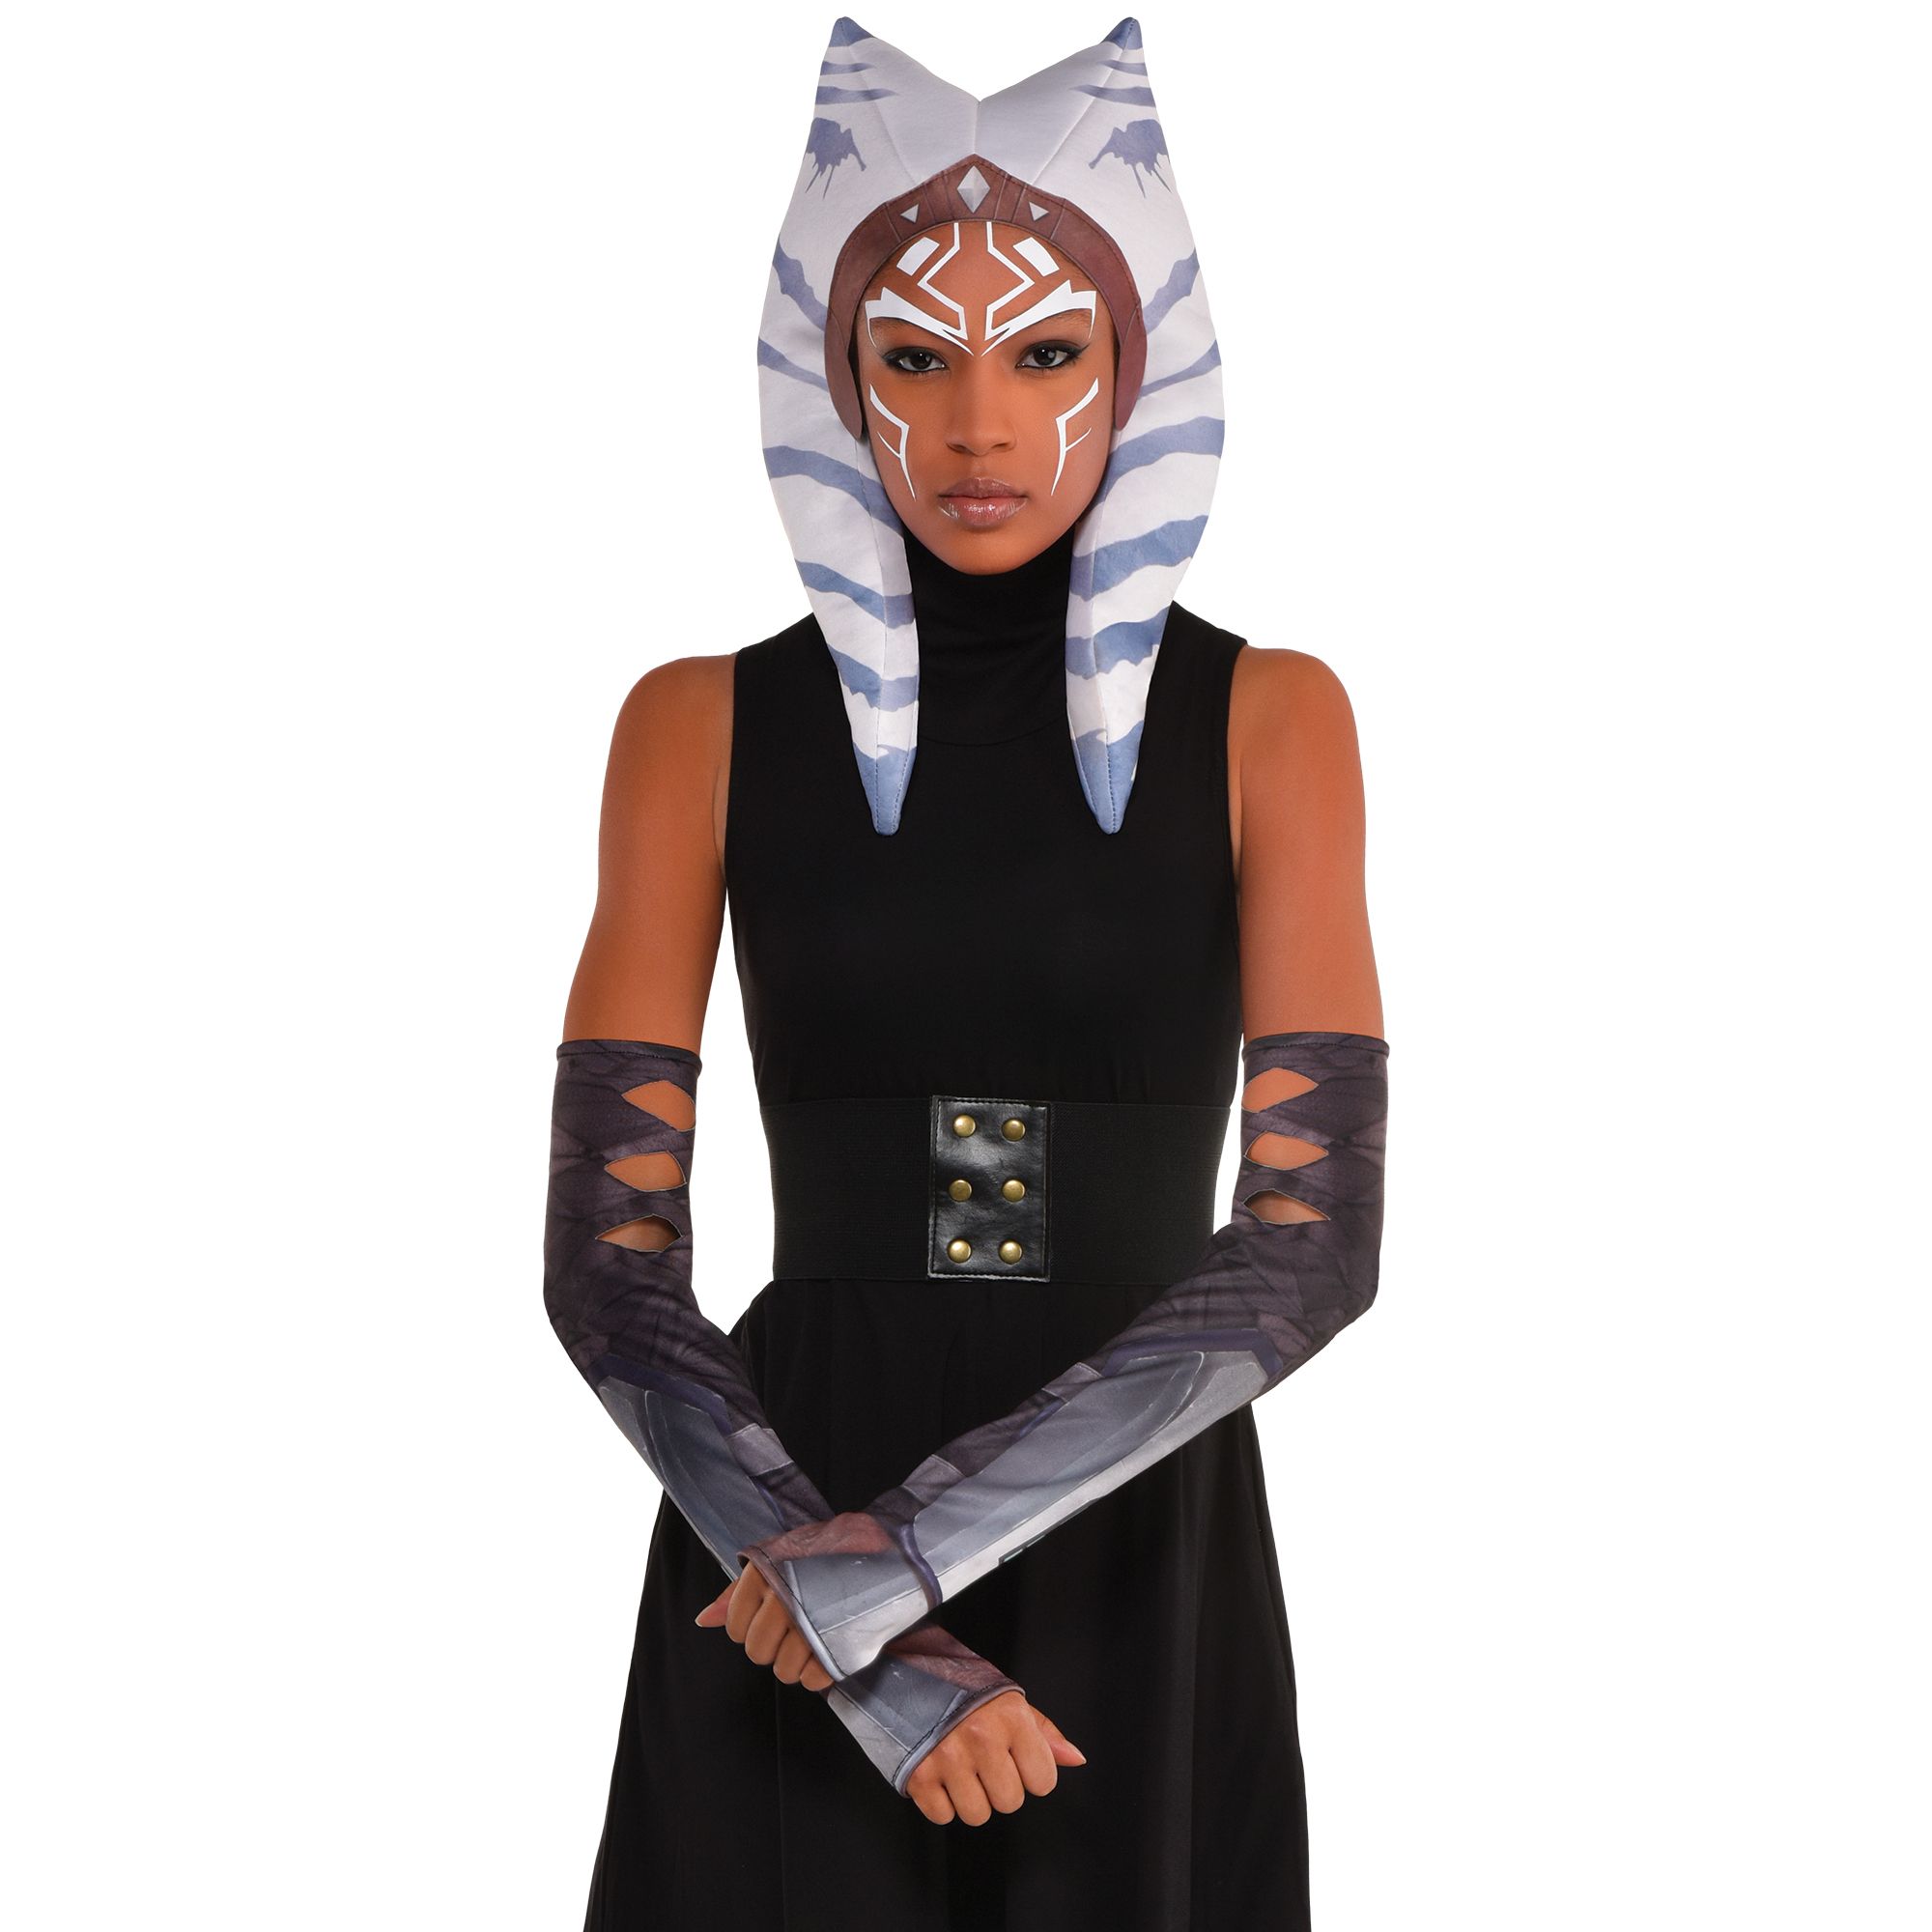 for　Size,　Sleeves,　Arm　Adult　Costume　Headpiece　Ahsoka　Accessories　Kit　Mandalorian　Wearable　3-pk,　Star　Disney　City　White/Black,　One　with　Wars　The　Party　Armour　Halloween